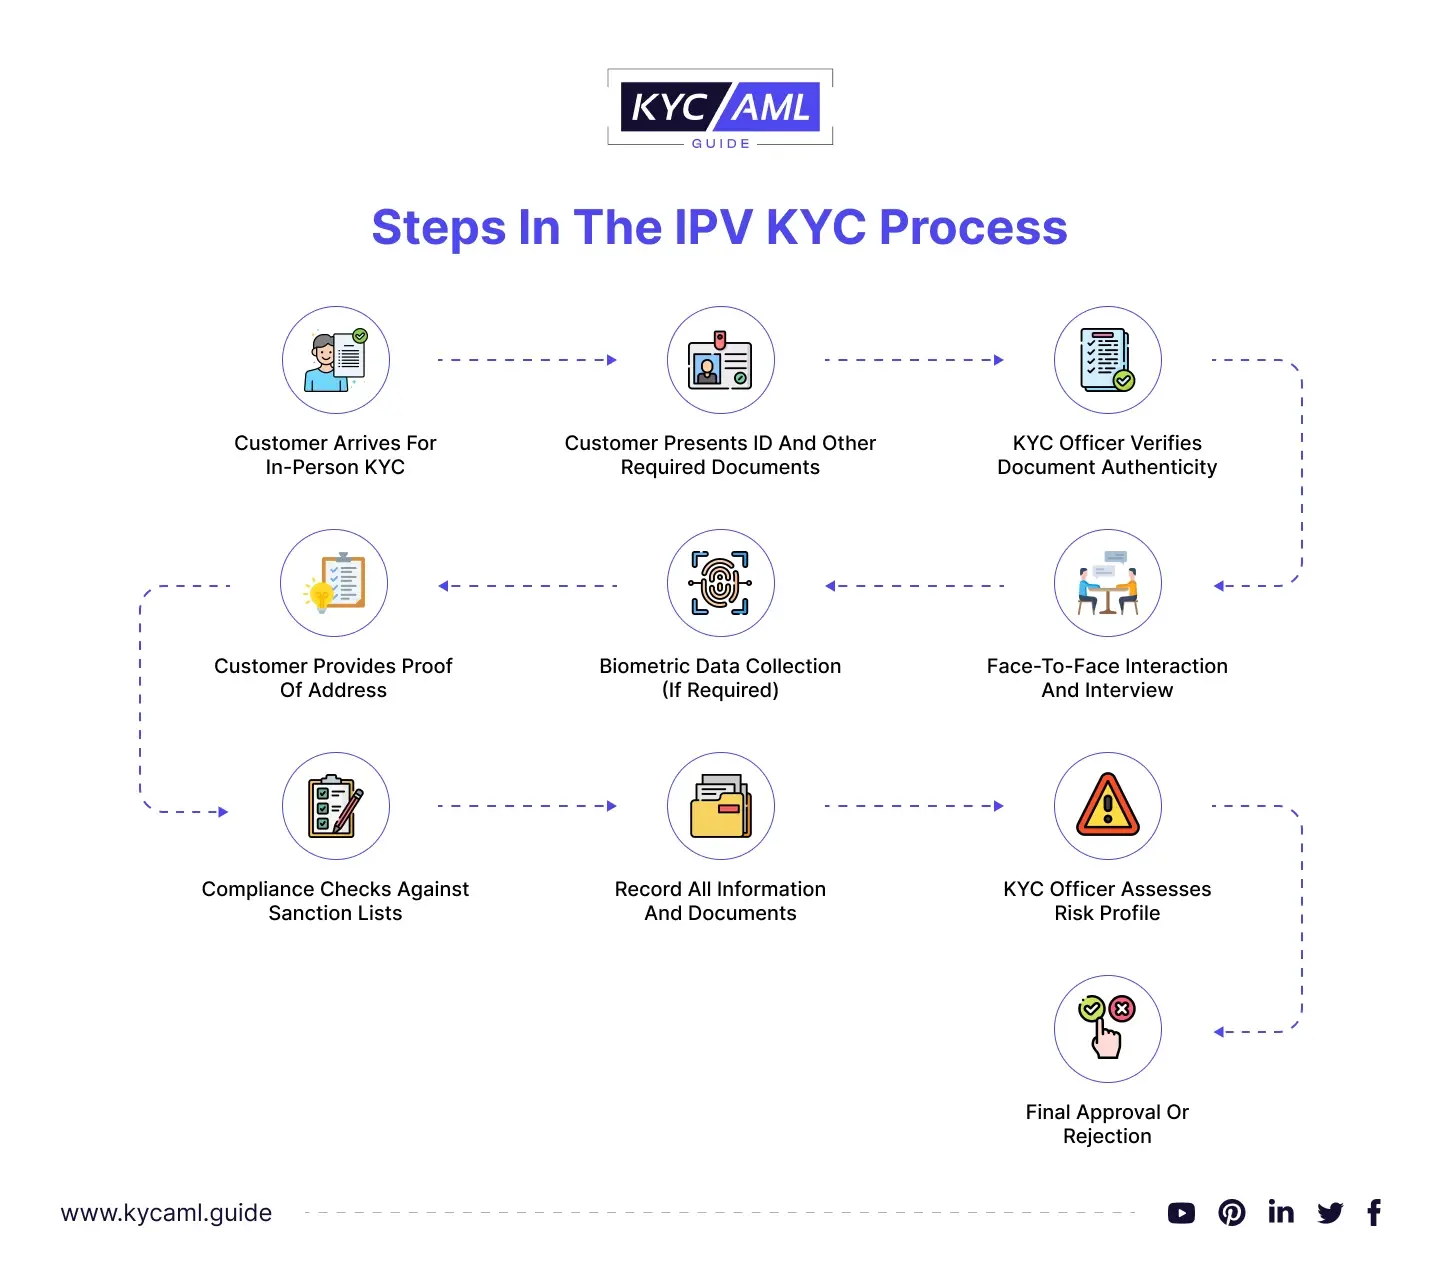 Steps in the IPV KYC process